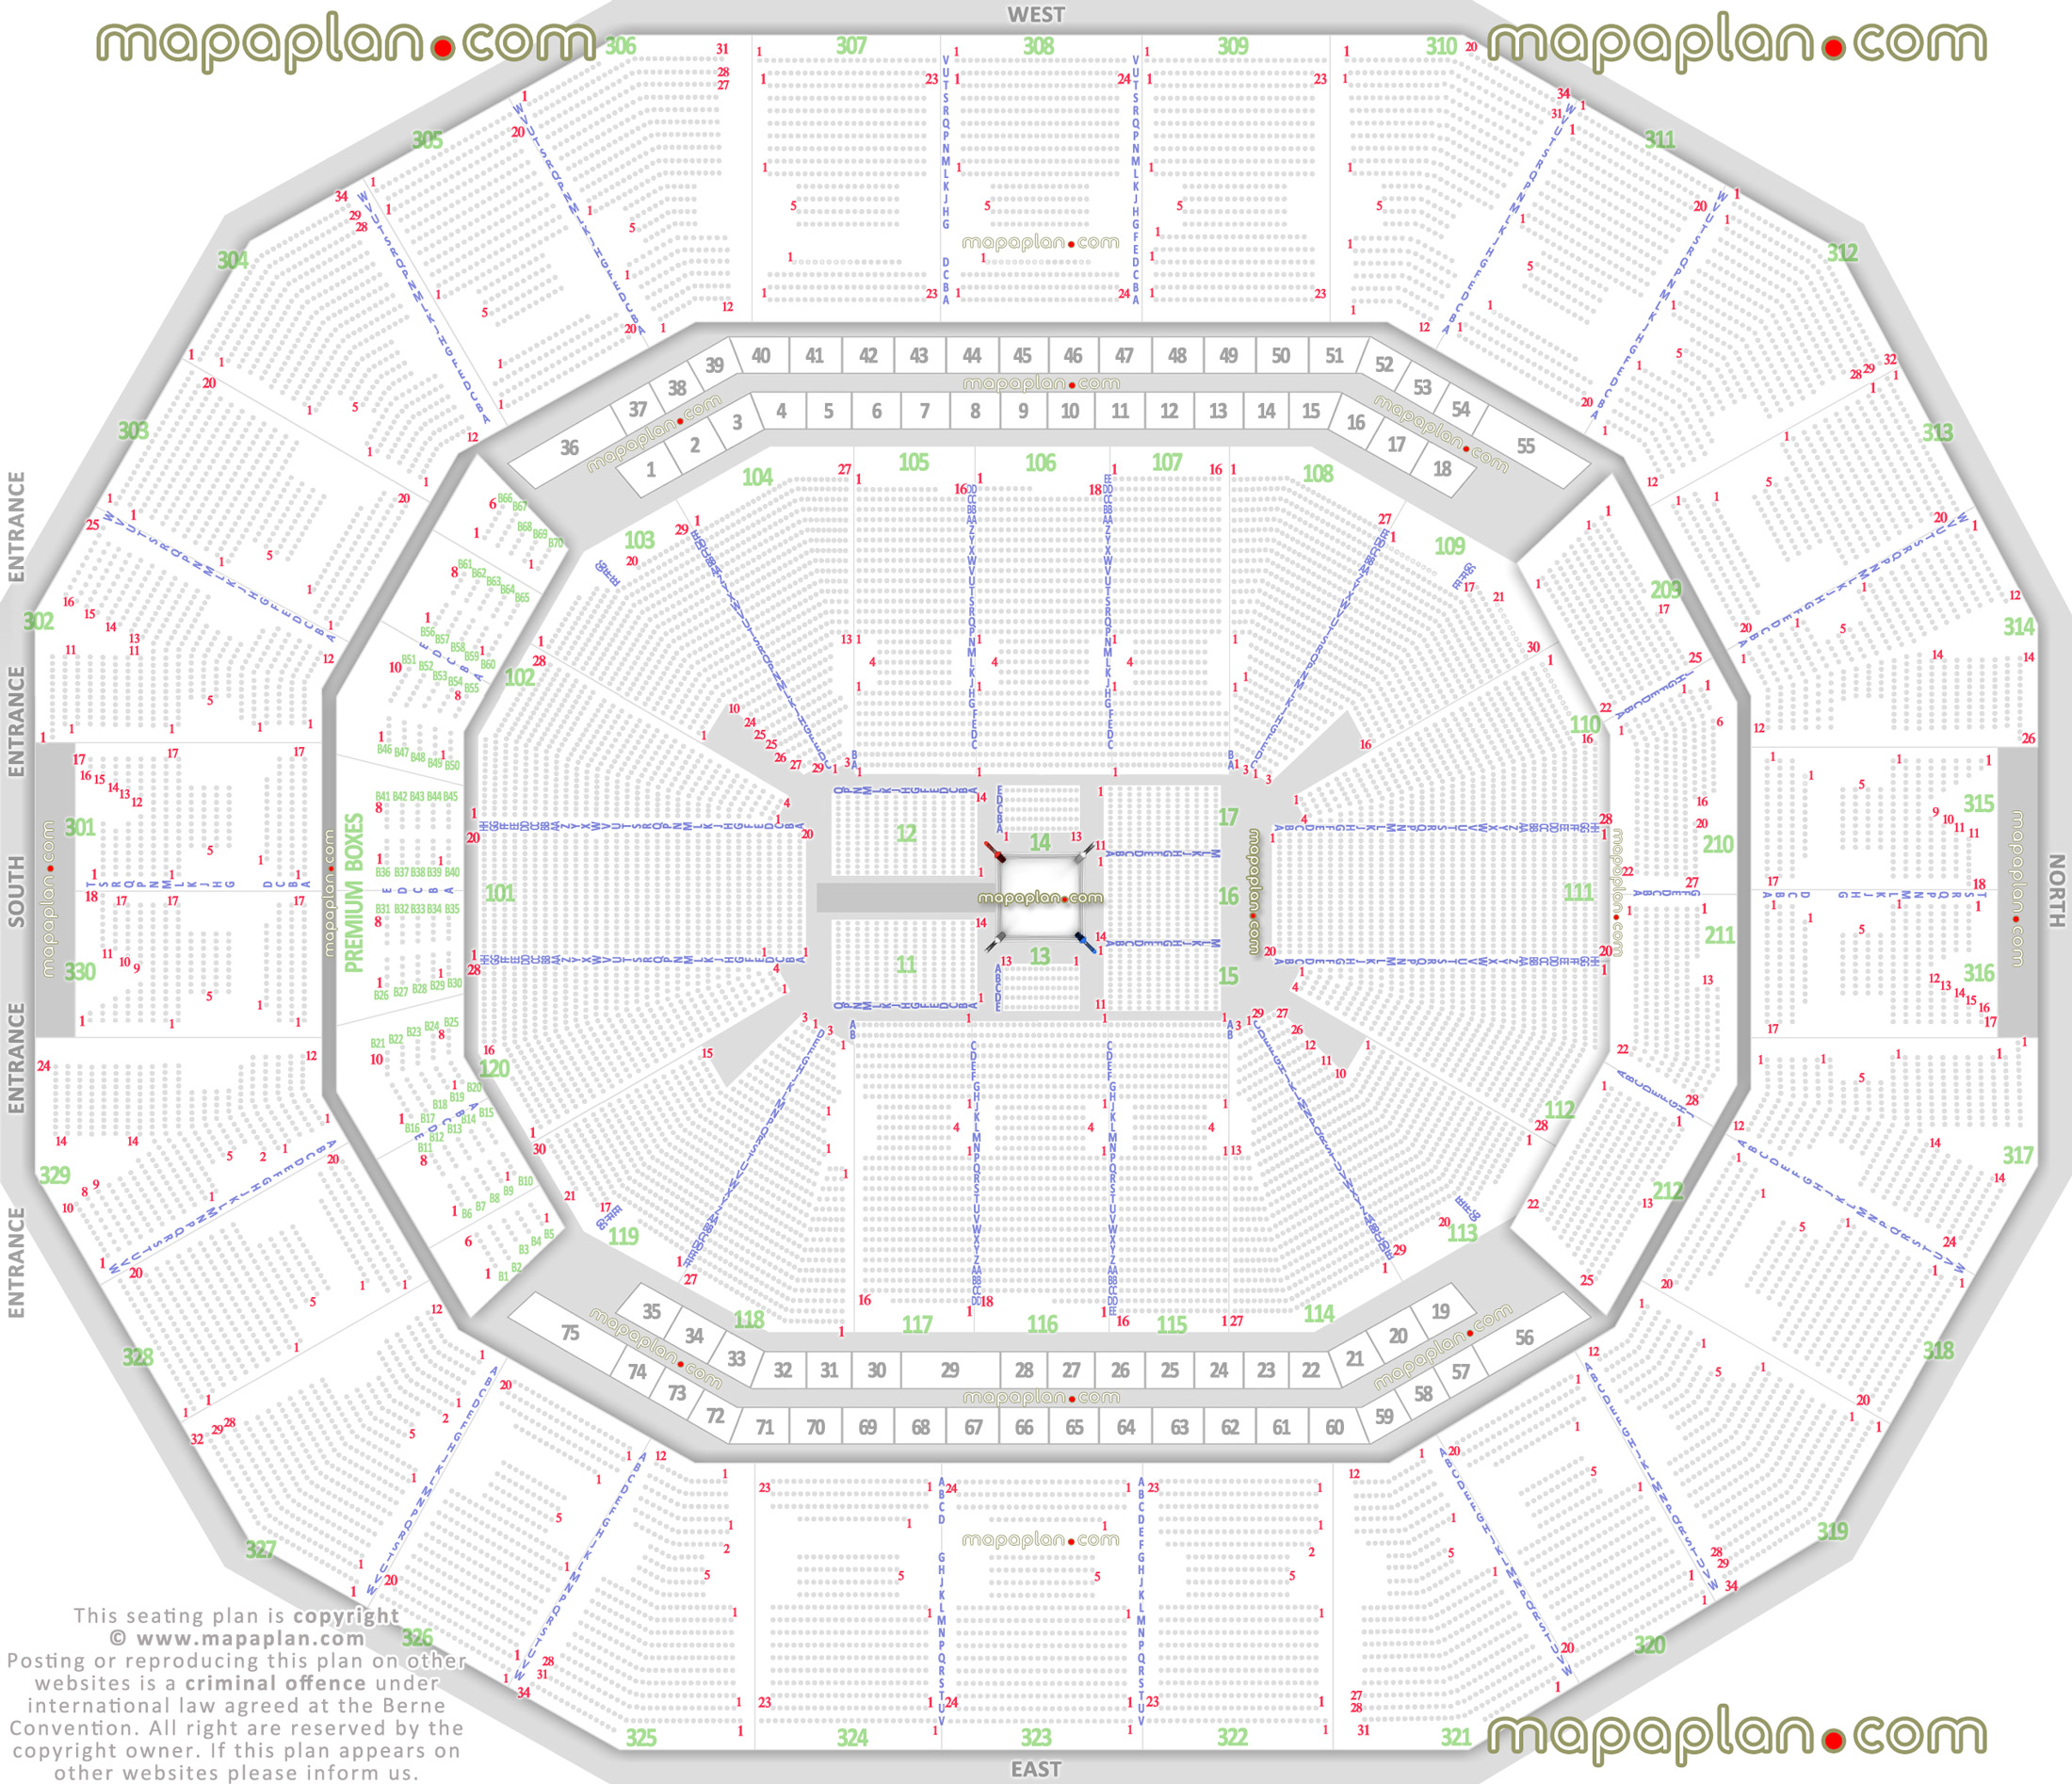 wwe raw smackdown live wrestling boxing match events 360 round ring configuration best good bad worst partial obstructed view seats executive hospitality rental suites level Louisville KFC Yum! Center seating chart